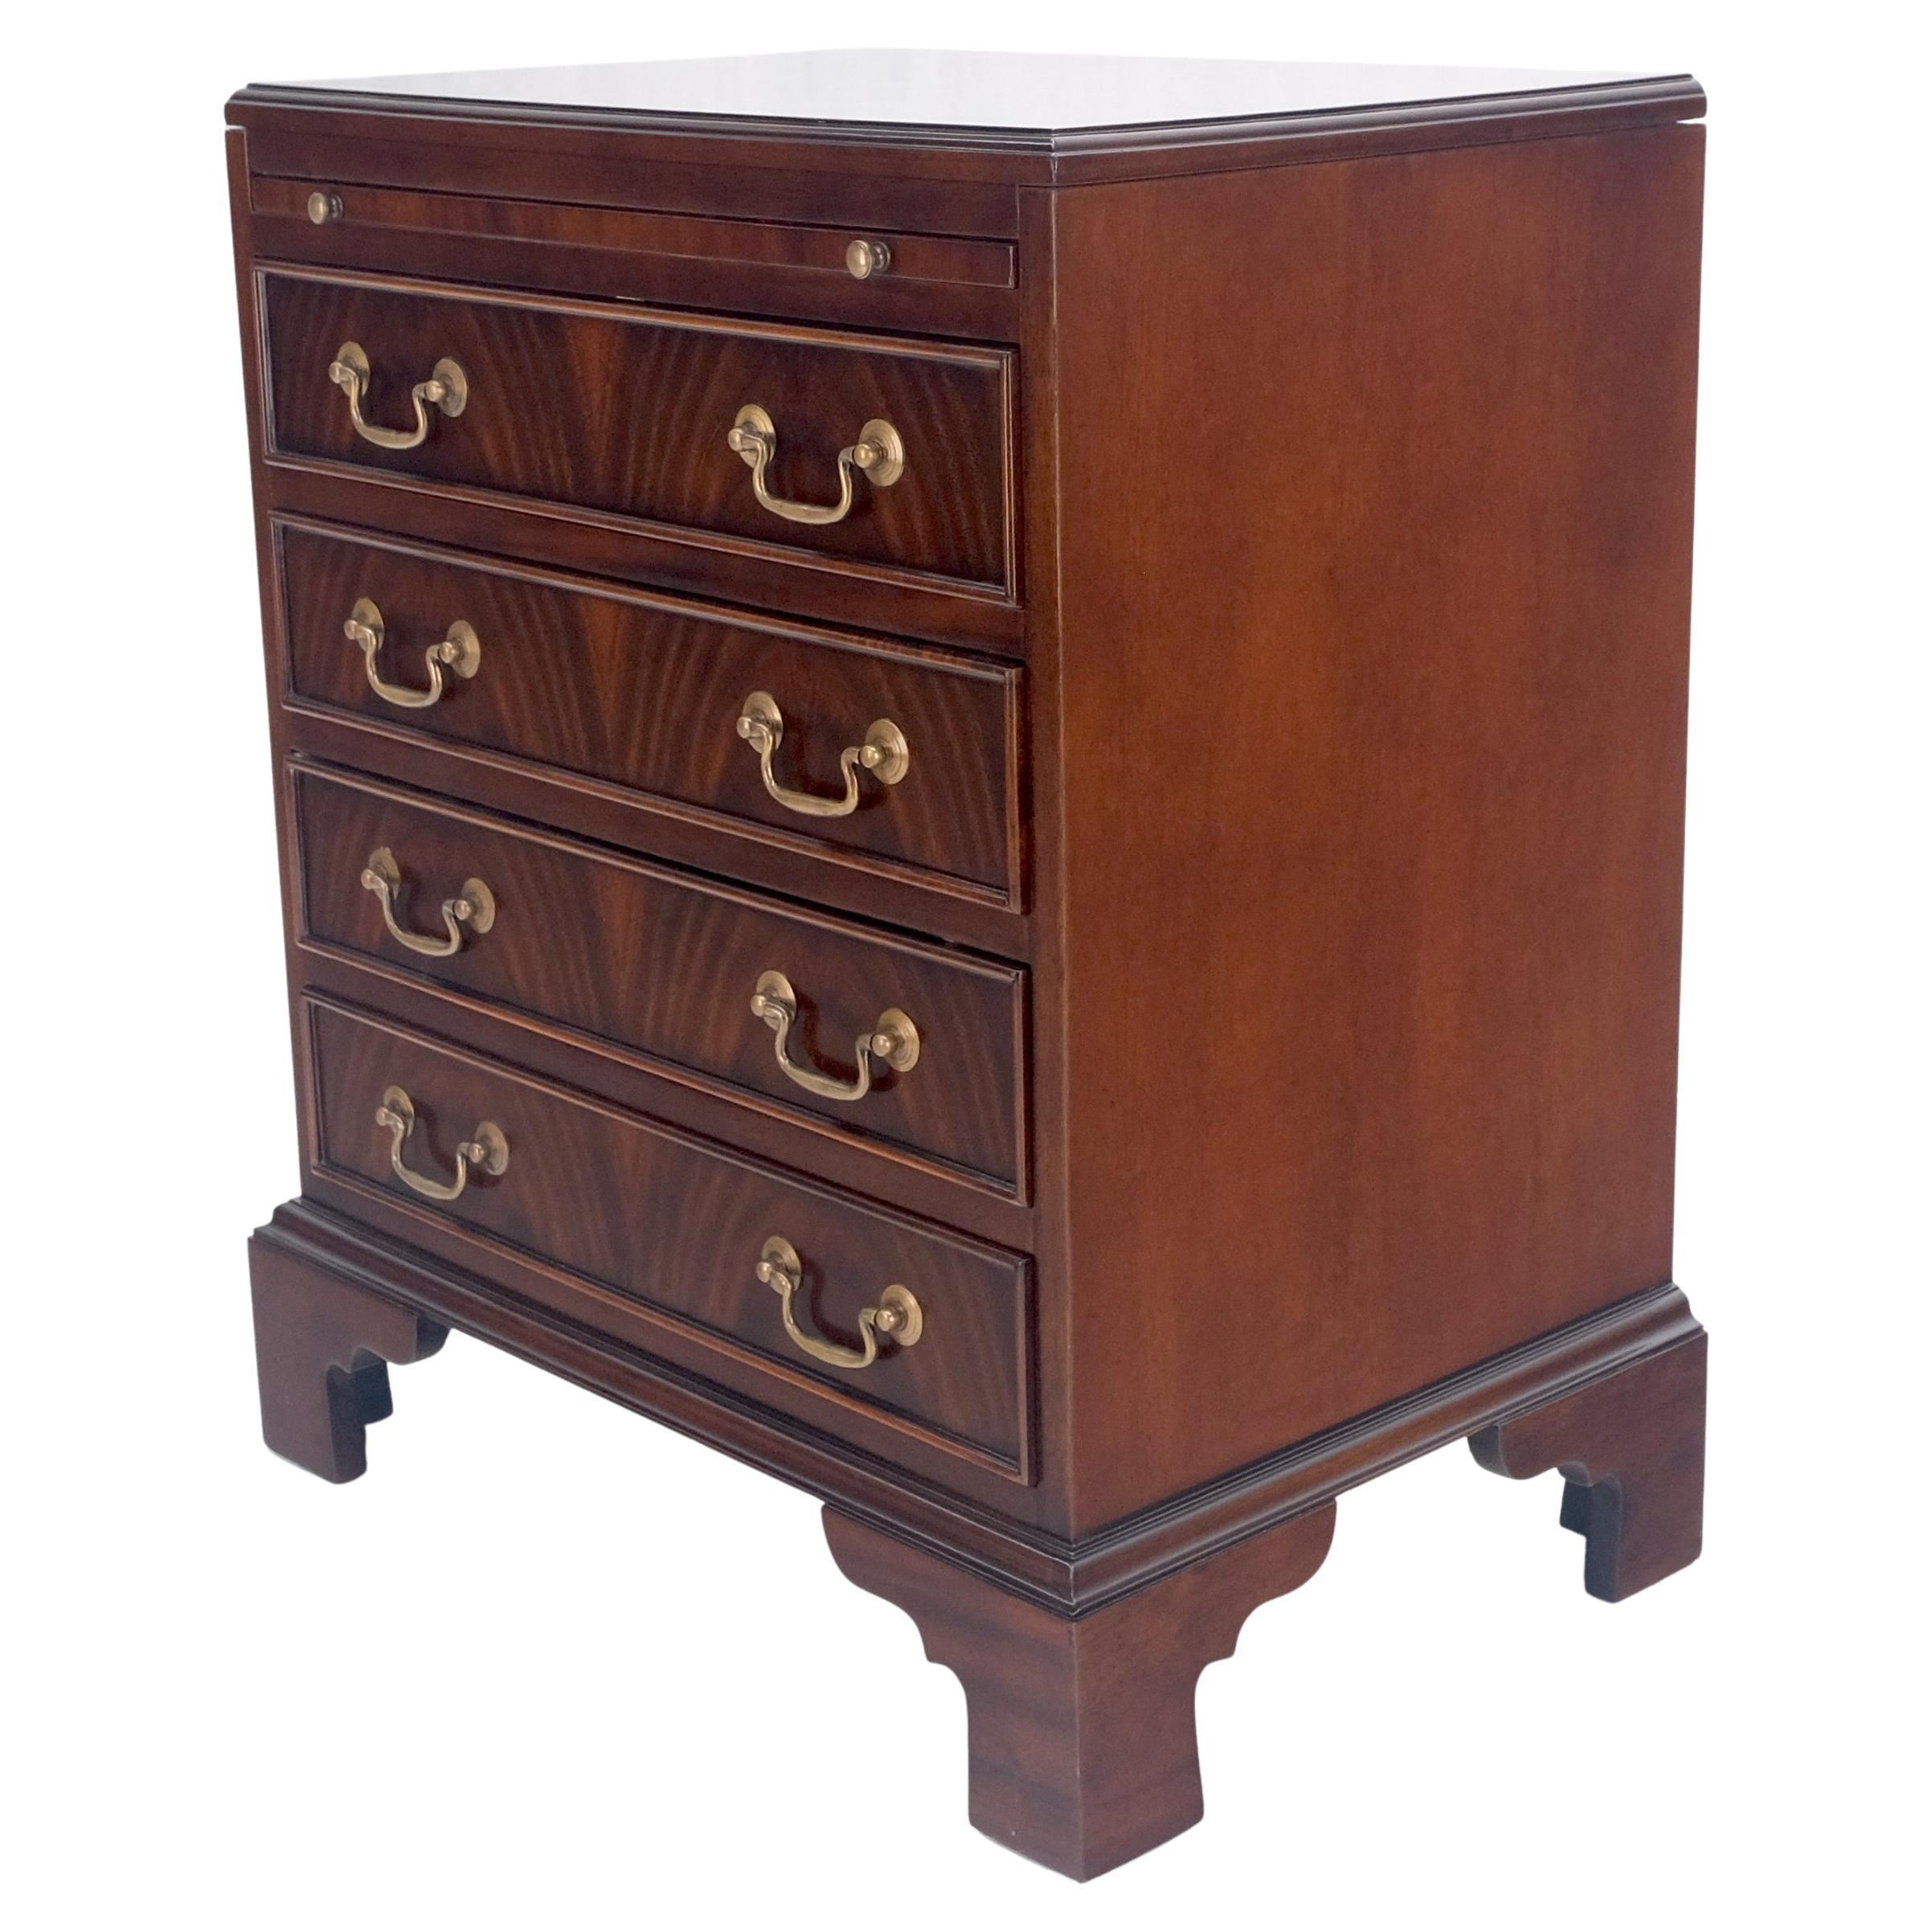 Pull Out Tray 4 Schubladen Flamme Mahagoni Messing Pull Compact Bachelor Chest Dresser im Angebot